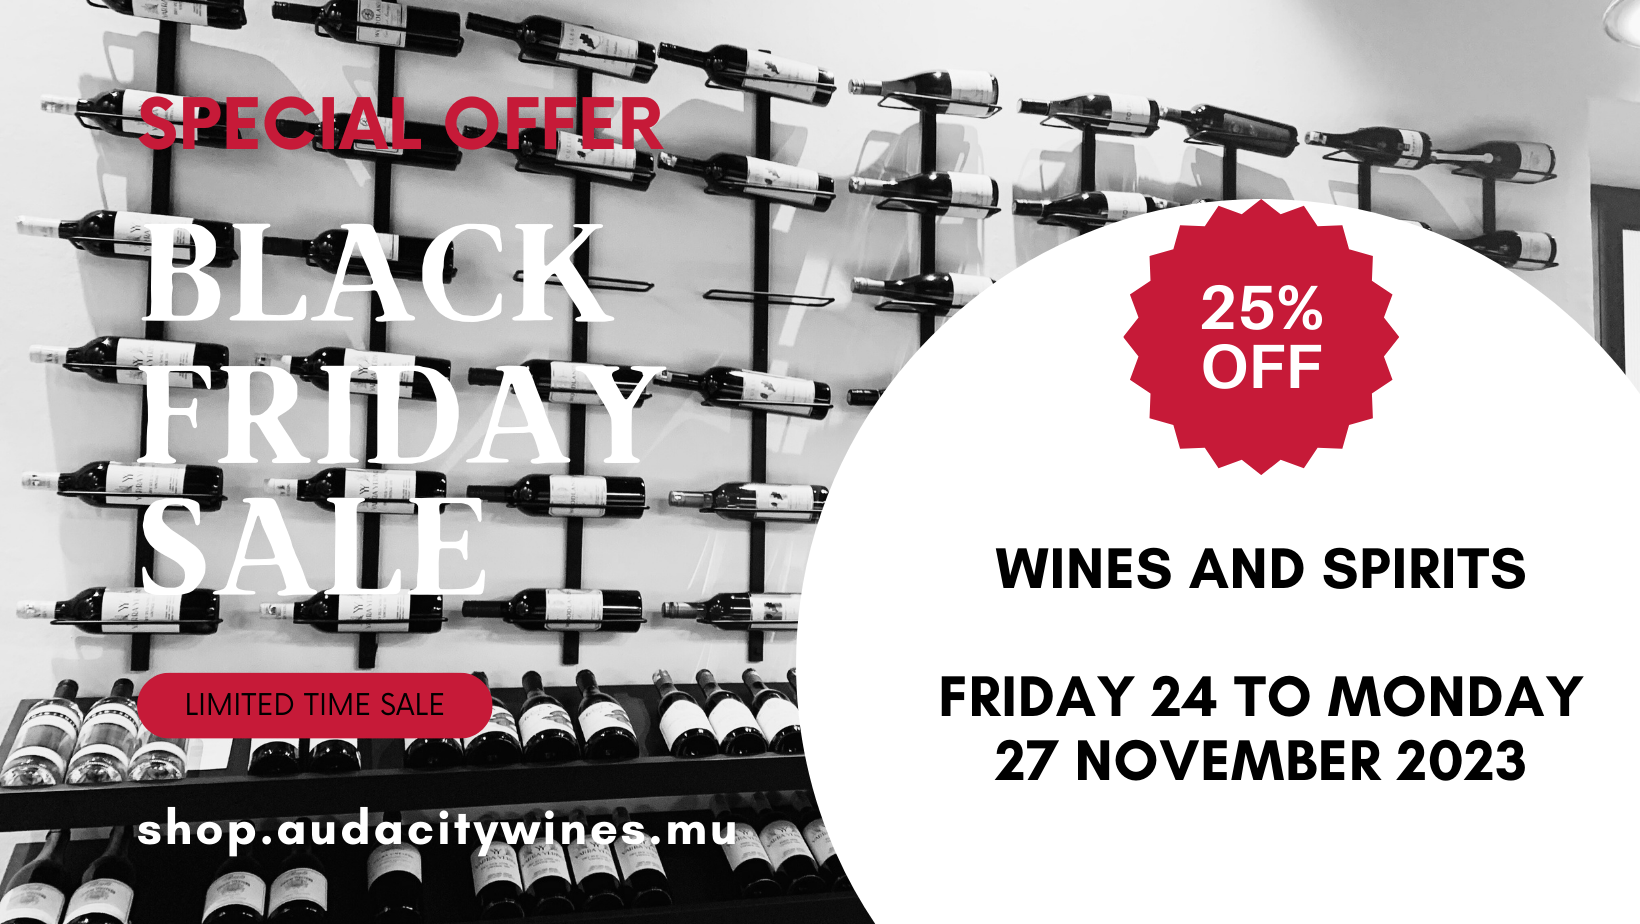 Black Friday 25% off wines and spirits